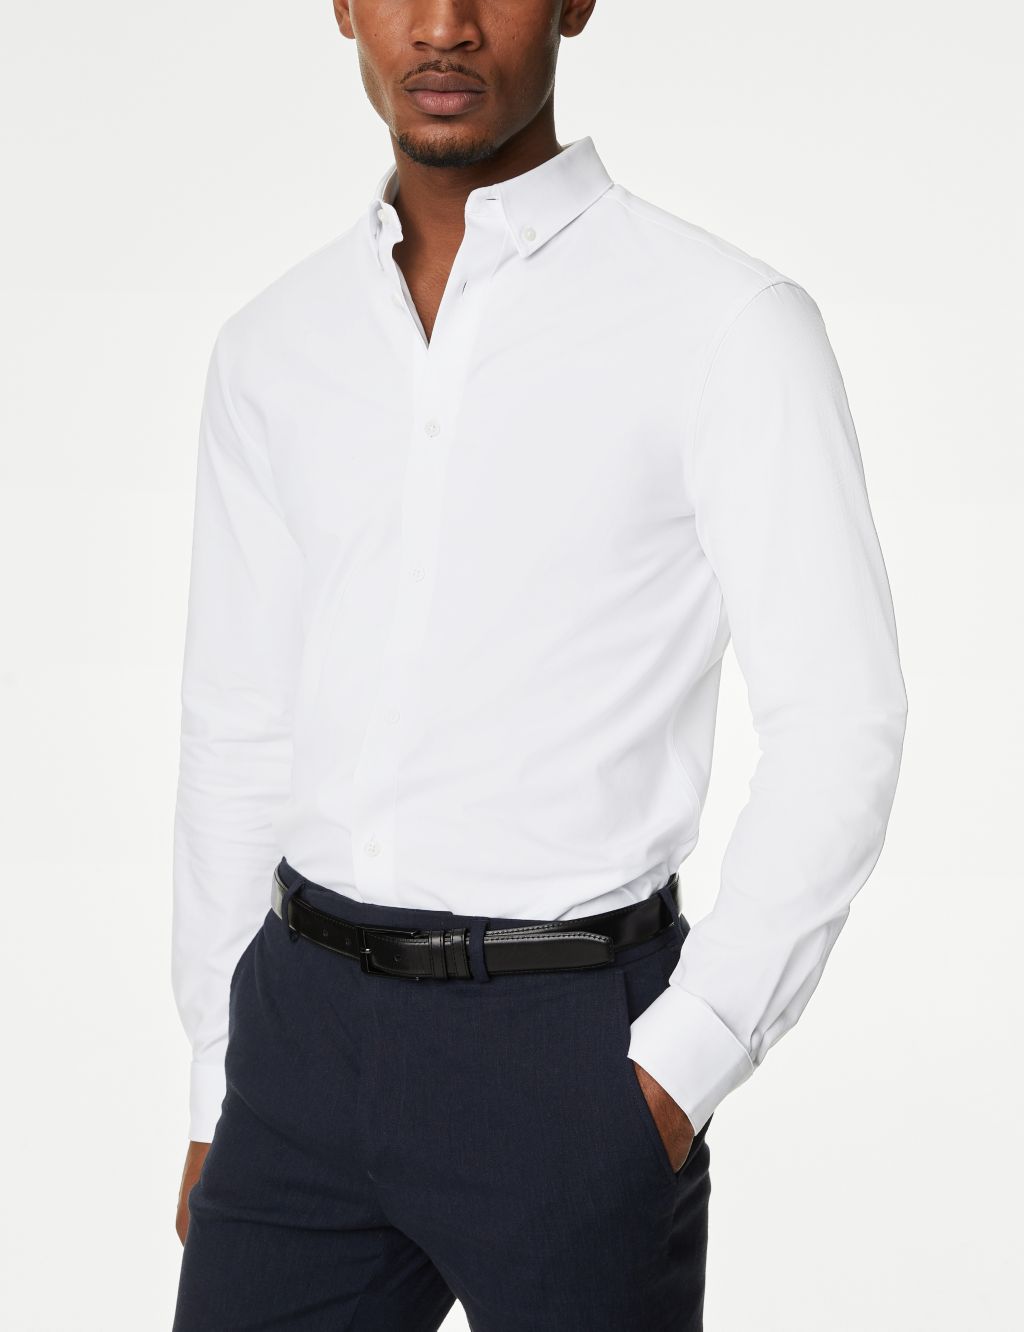 Slim Fit Ultimate Shirt with Stretch image 1